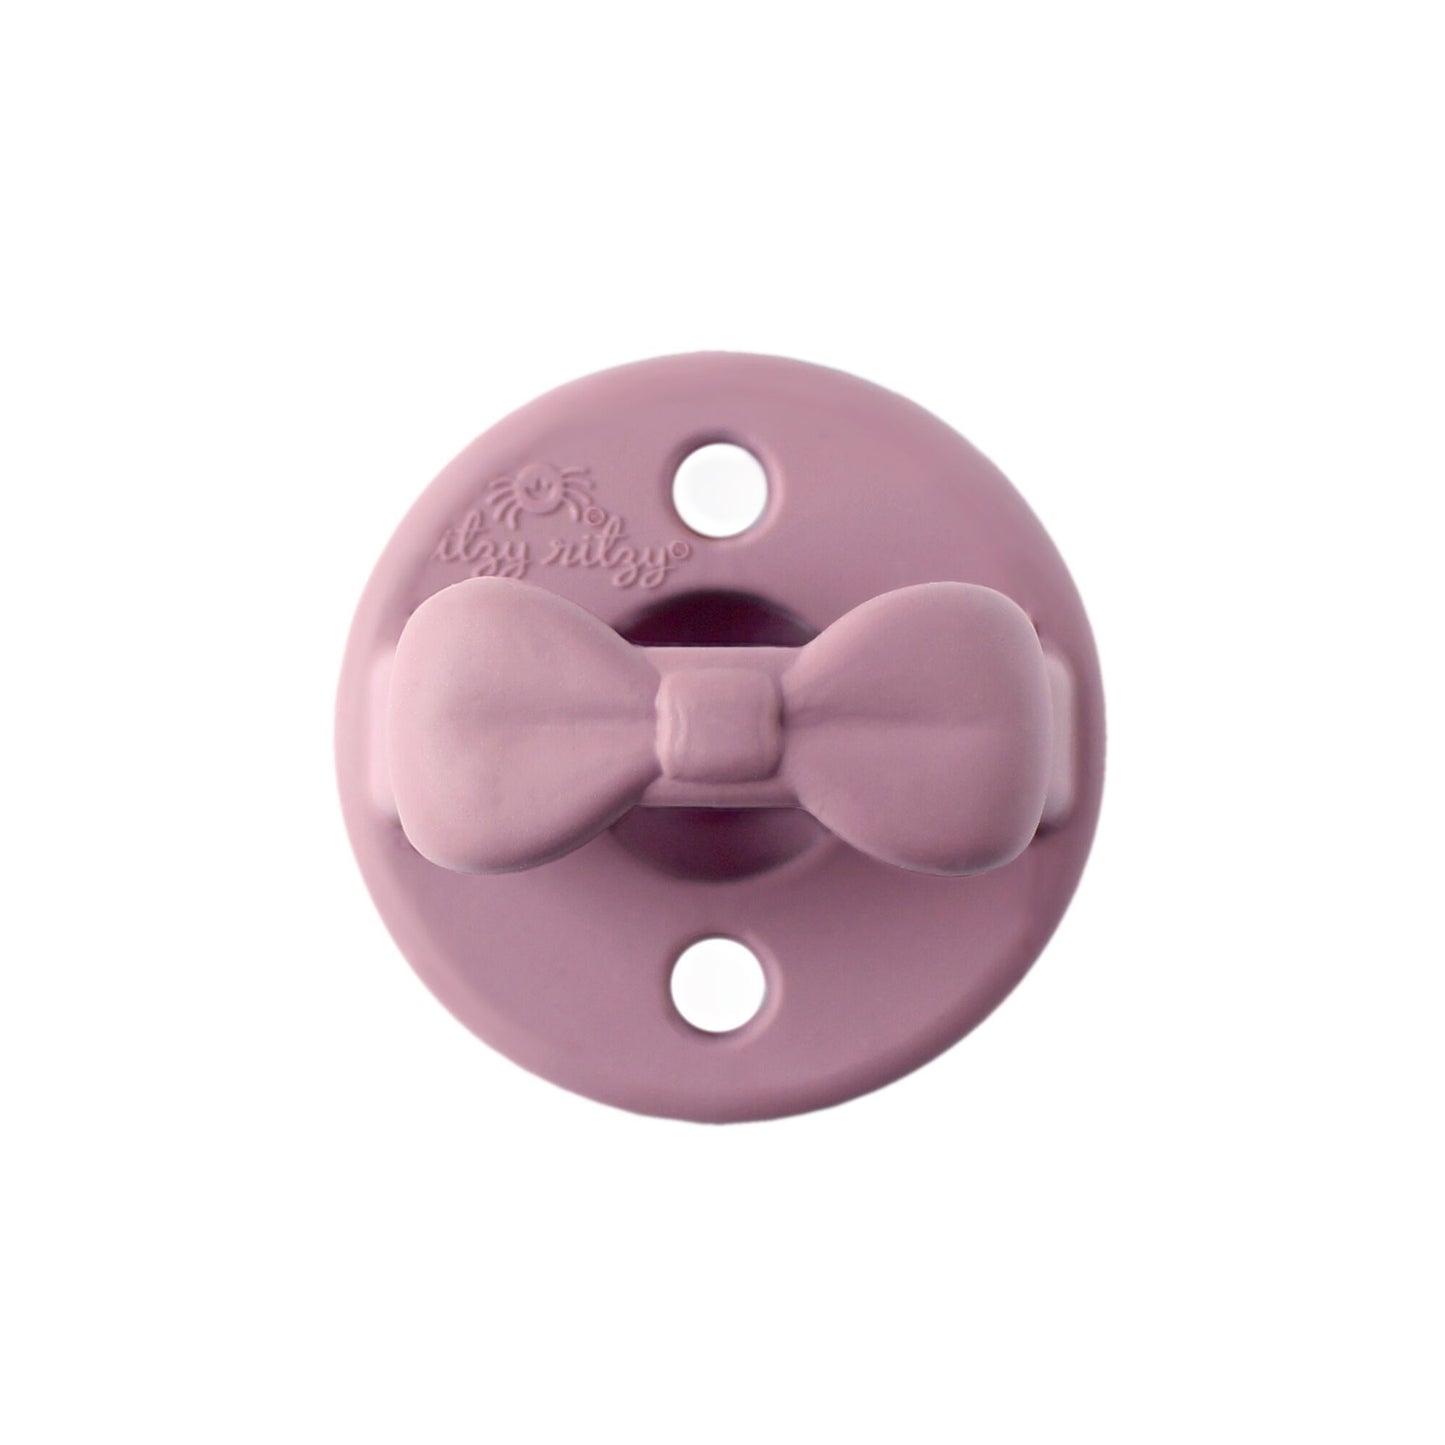 Itzy Ritzy Lilac & Orchid Sweetie Soother Pacifier 2PC Set